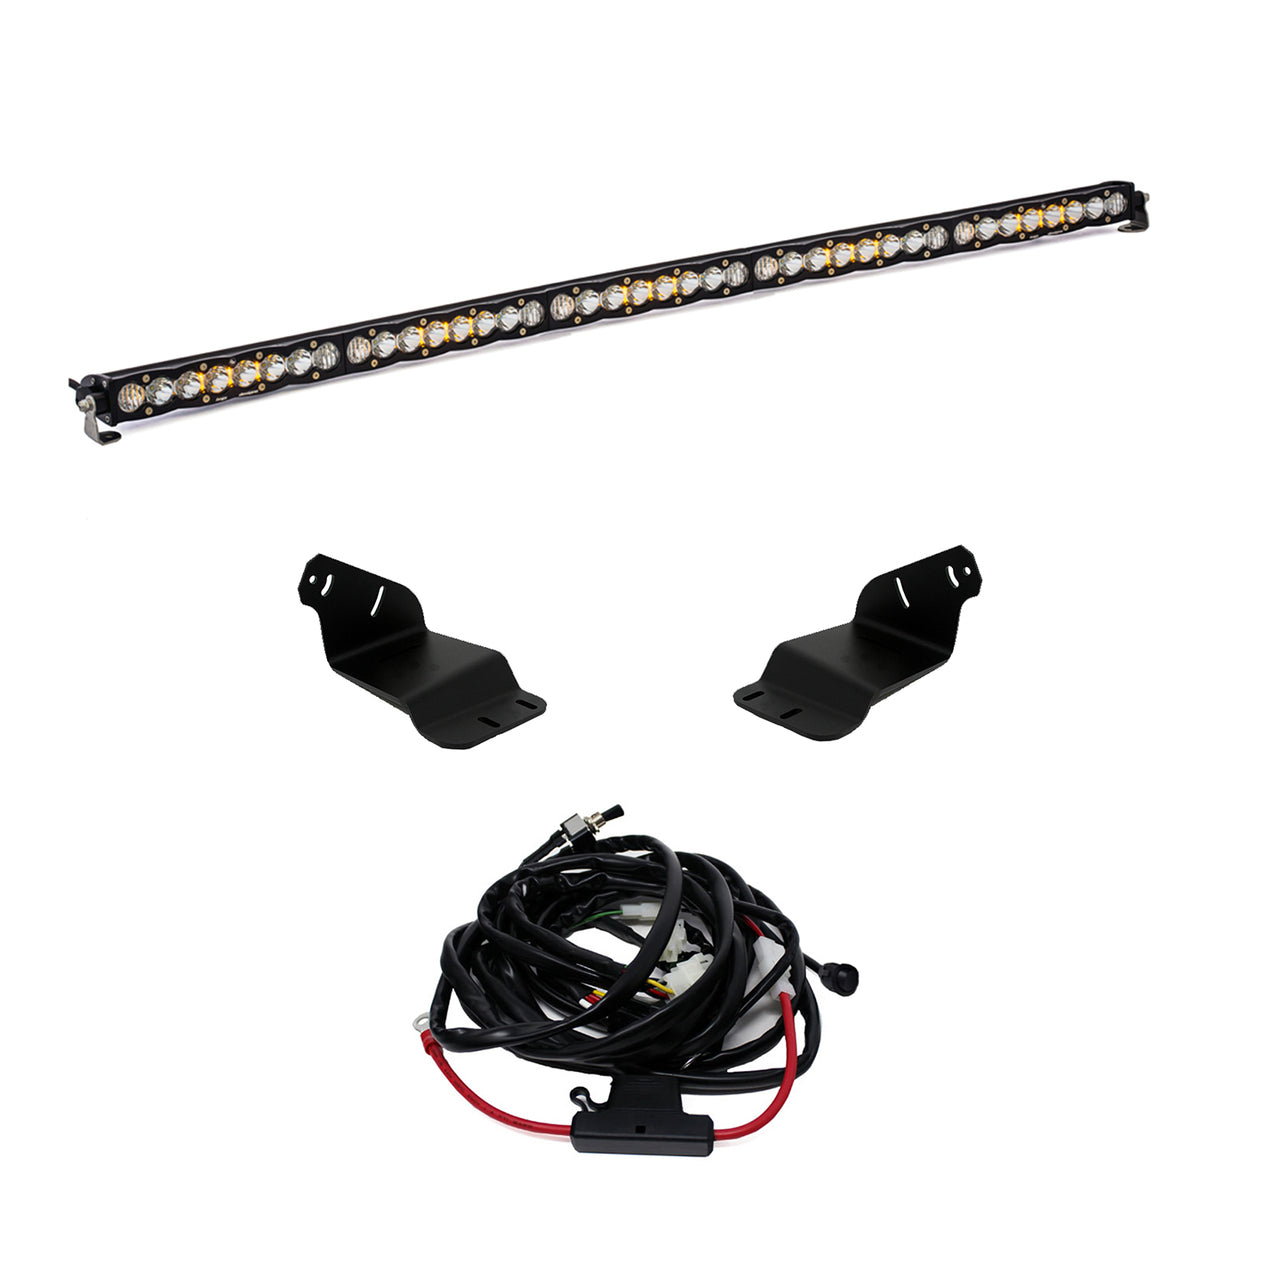 Ford S8 50 Inch Roof Mount Light Kit